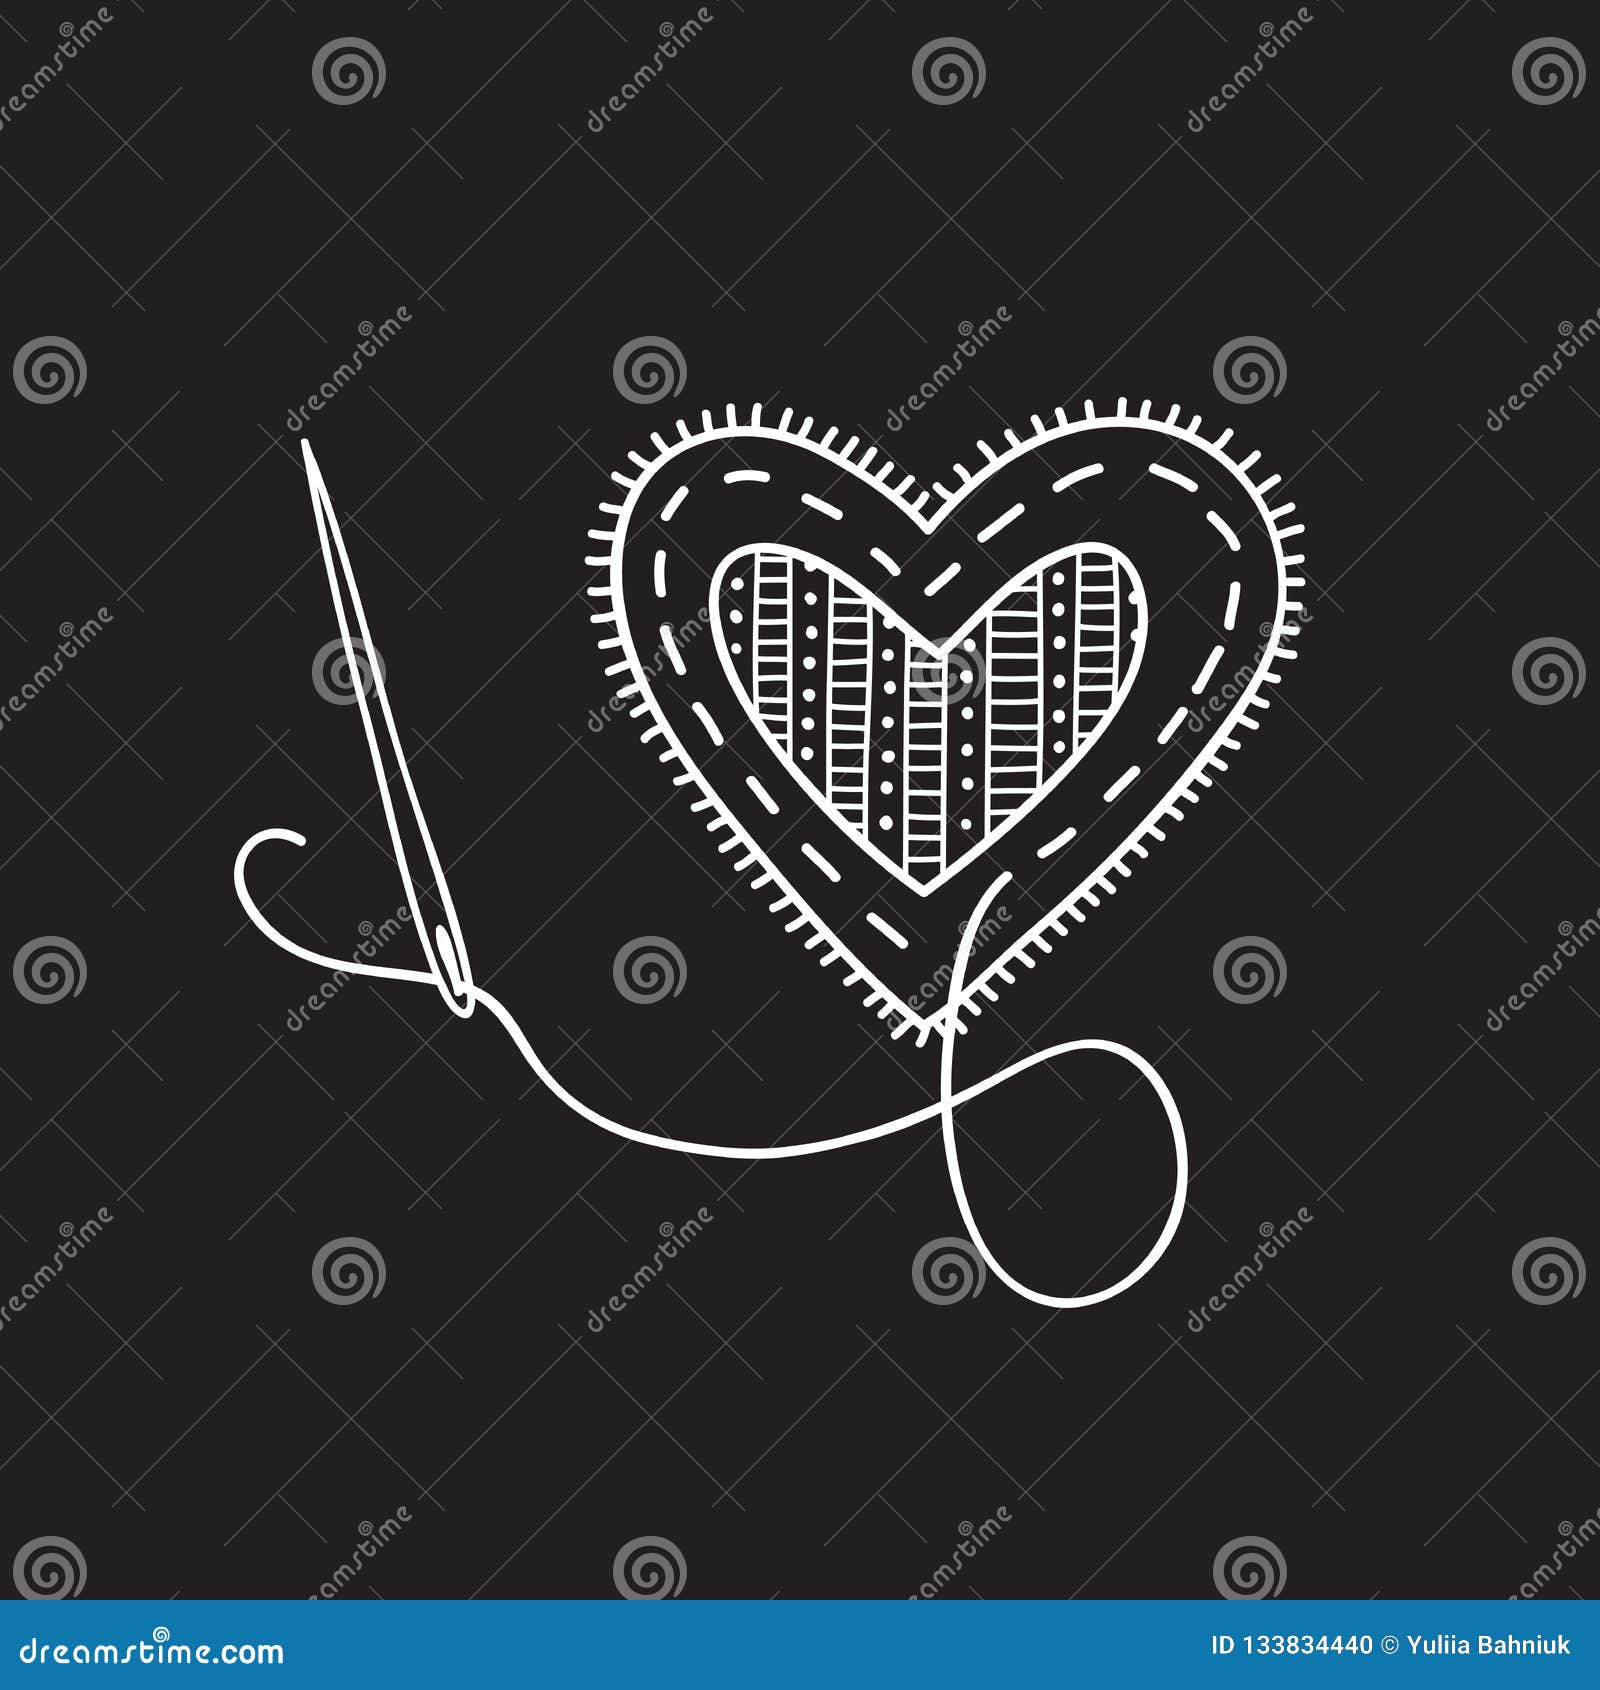 Vector sewing heart stock vector. Illustration of craft - 133834440